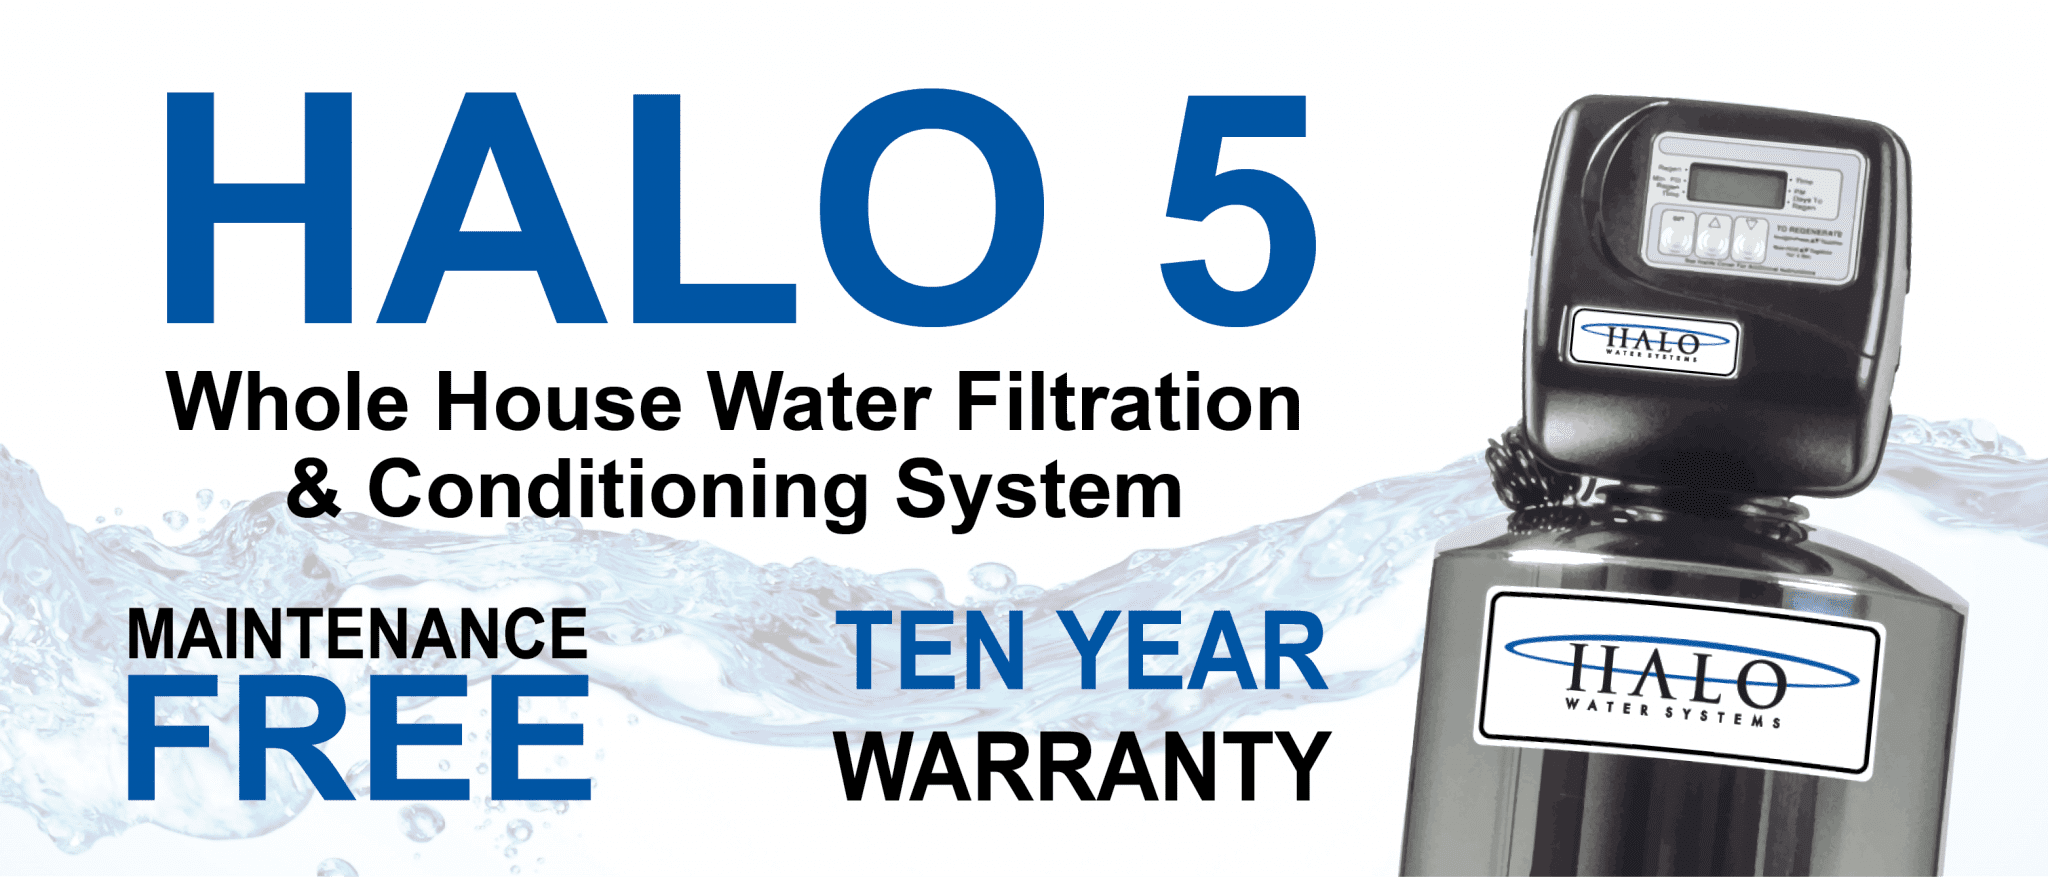 halo5 water filtration